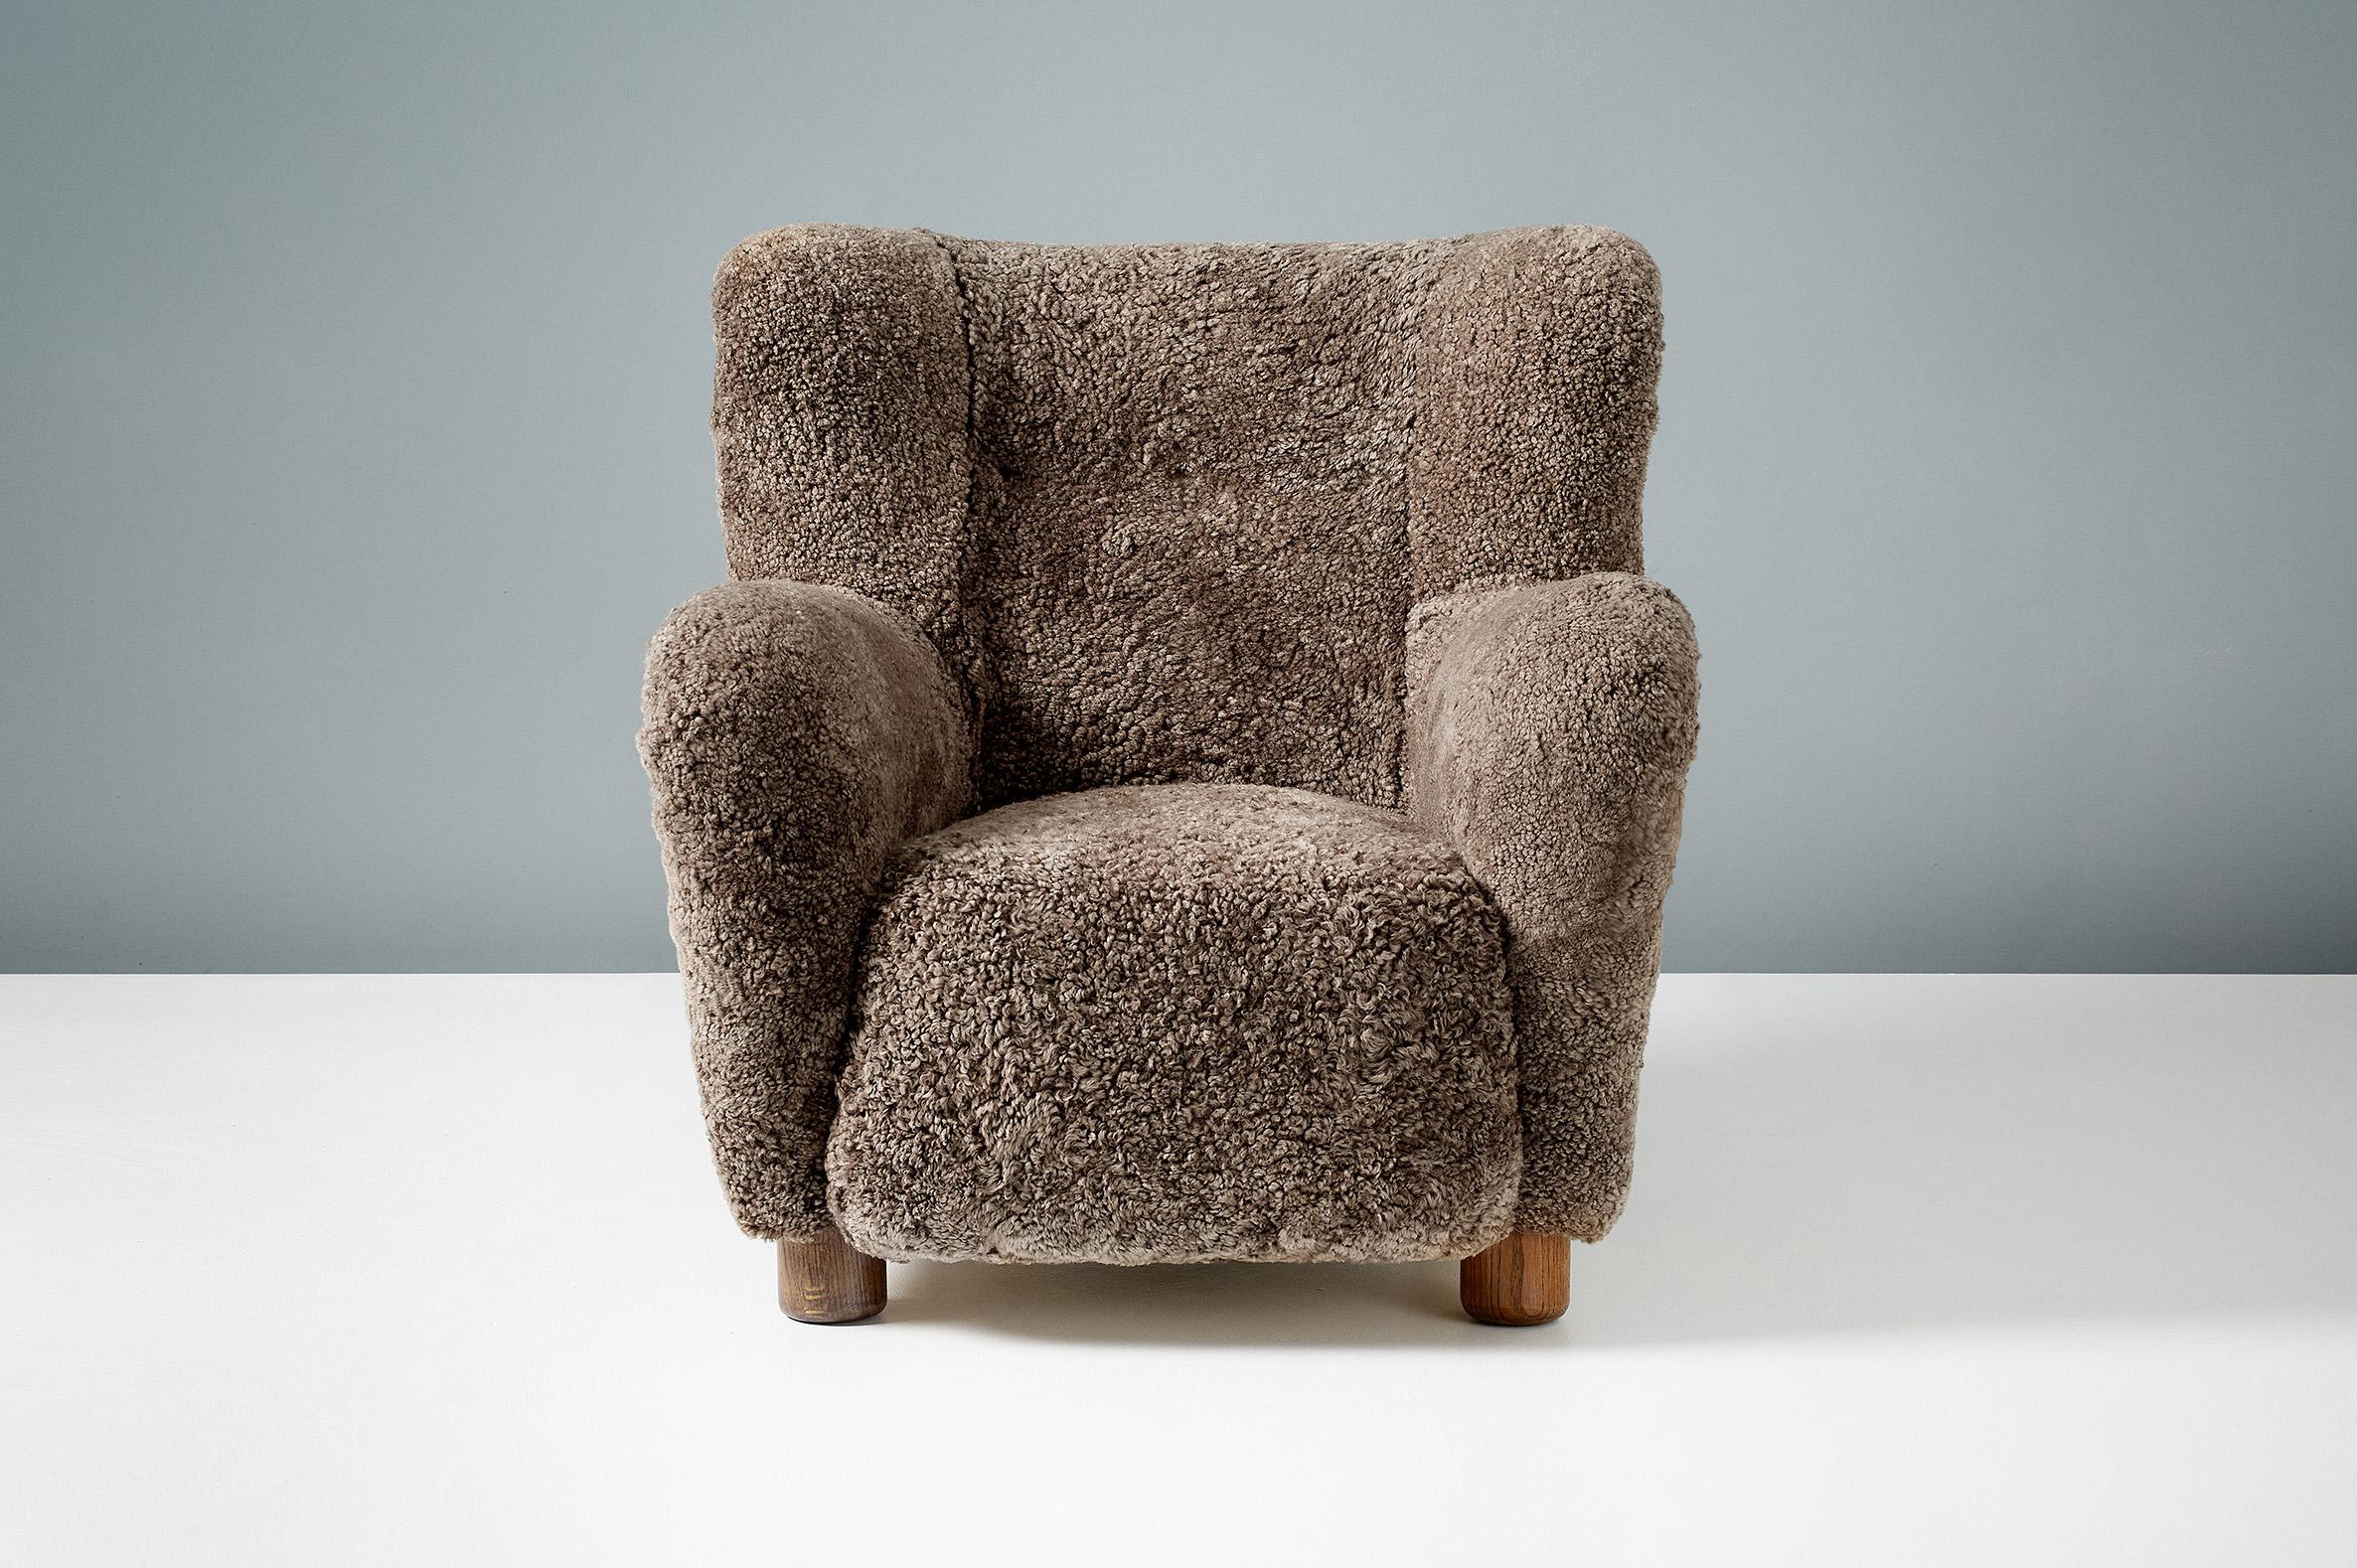 Large vintage armchair produced in Denmark sometime between 1940-1950. The legs are patented, oiled European oak and the chair has been completely reconditioned in our London workshop with new upholstery in luxurious 'Sahara' brown shearling from